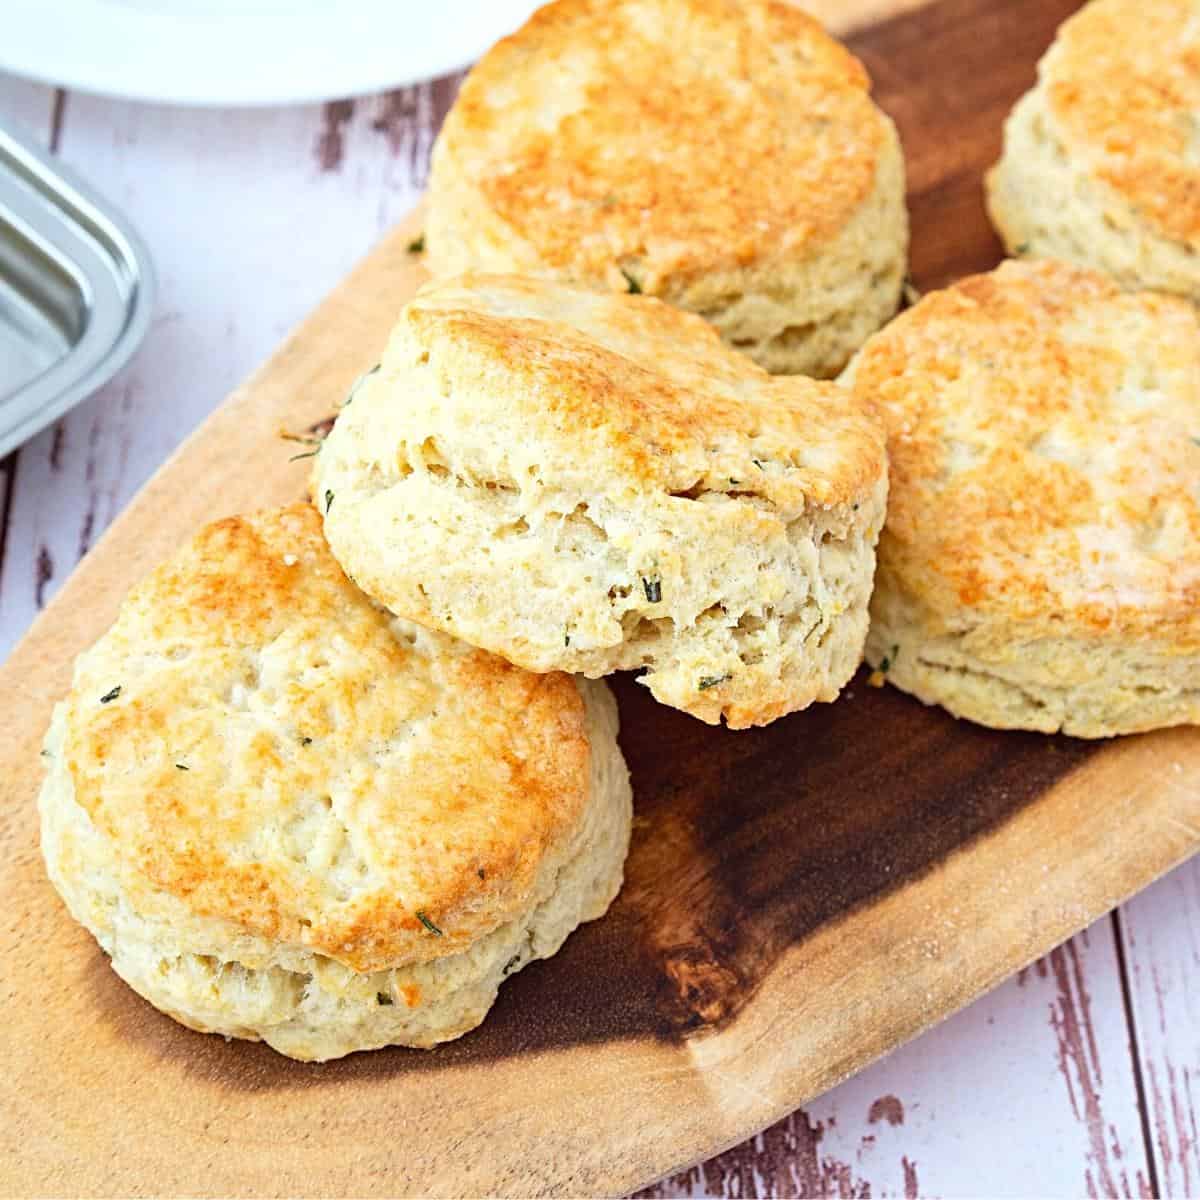 Biscuits with cheddar cheese on a table.